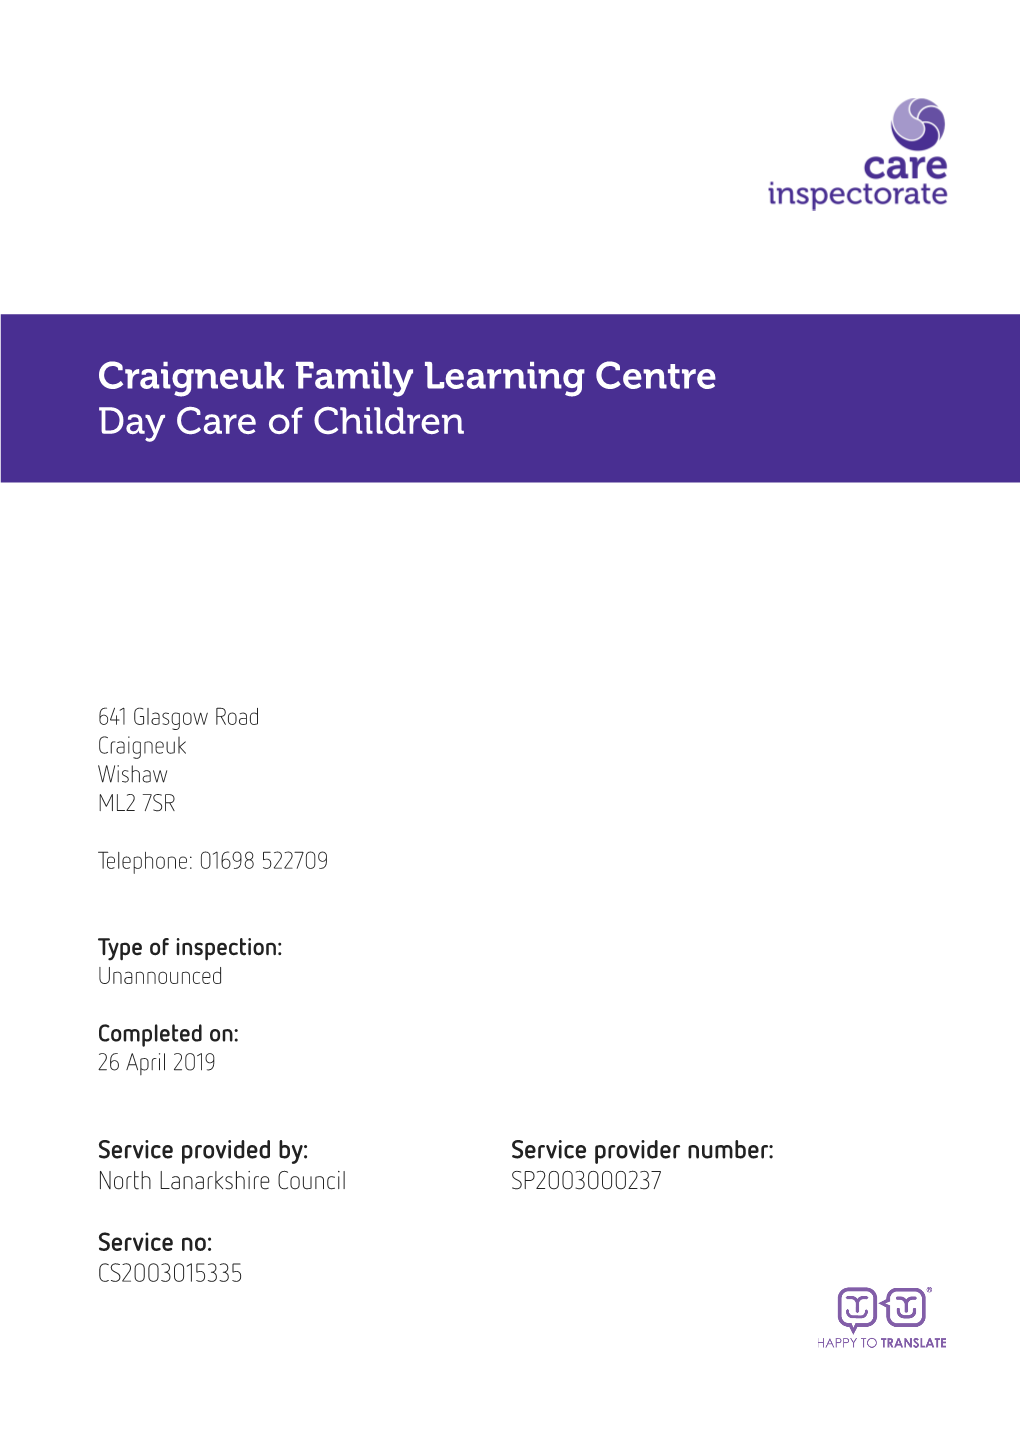 Craigneuk Family Learning Centre Day Care of Children